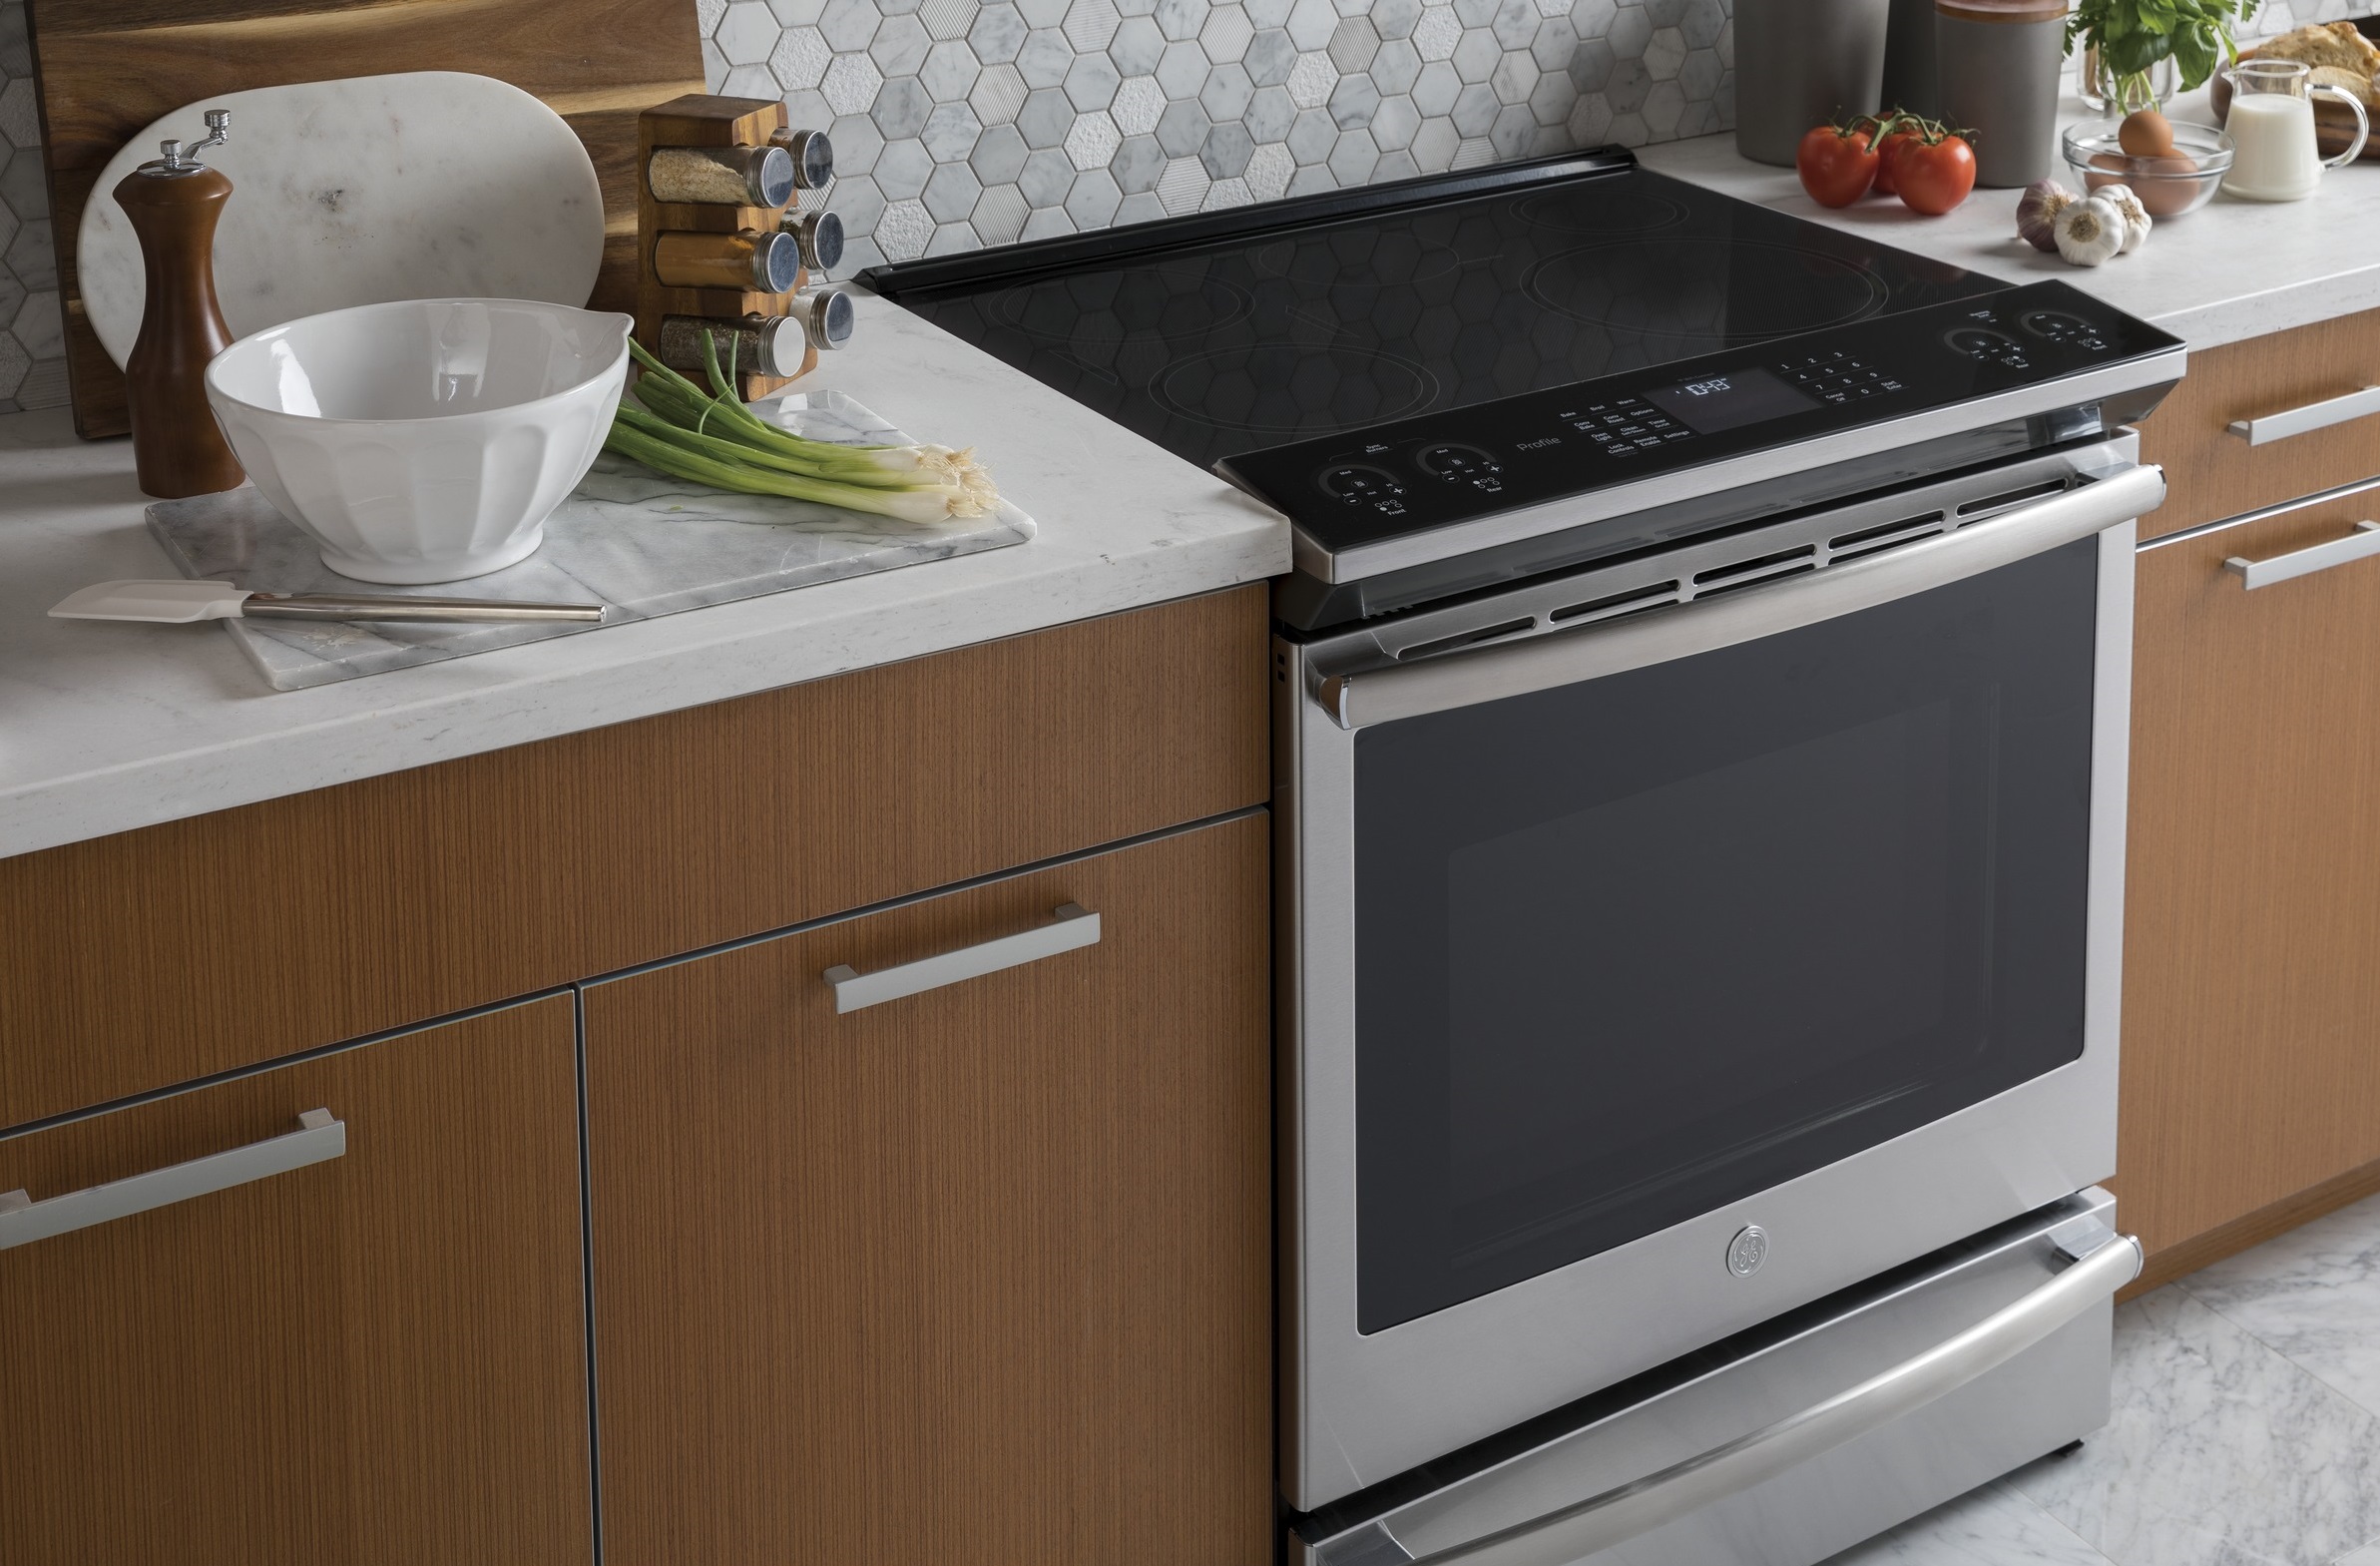 How to Choose Between a Cooktop and Wall Oven or Range from GE Profile